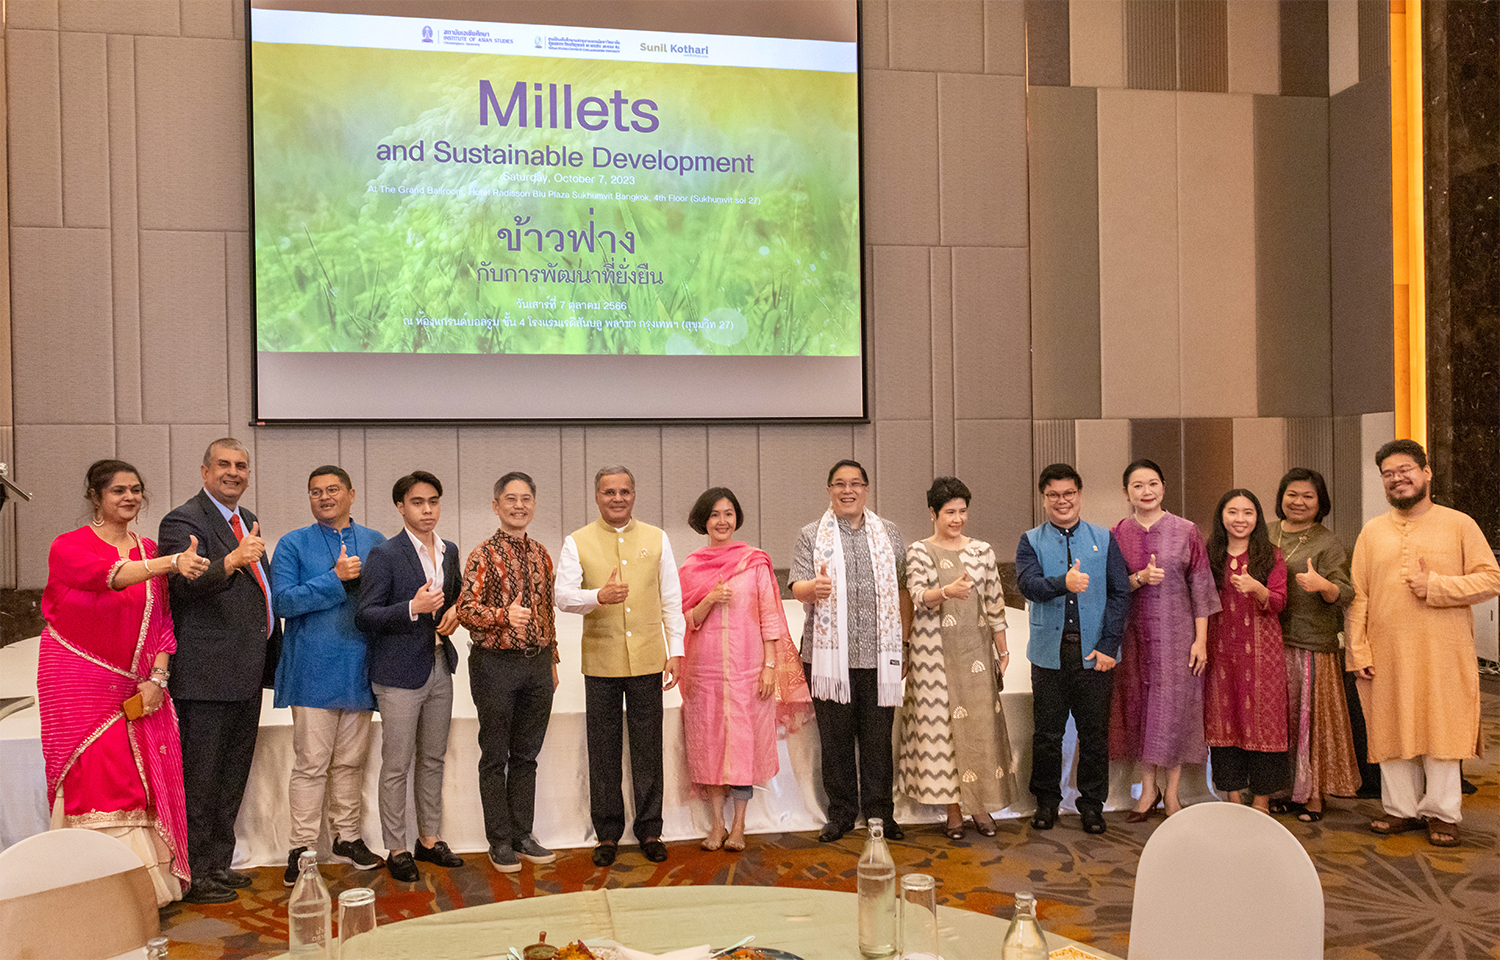 Sunil Kothari, Chula University, and Millets: A Recipe for Nutritious Sustainability